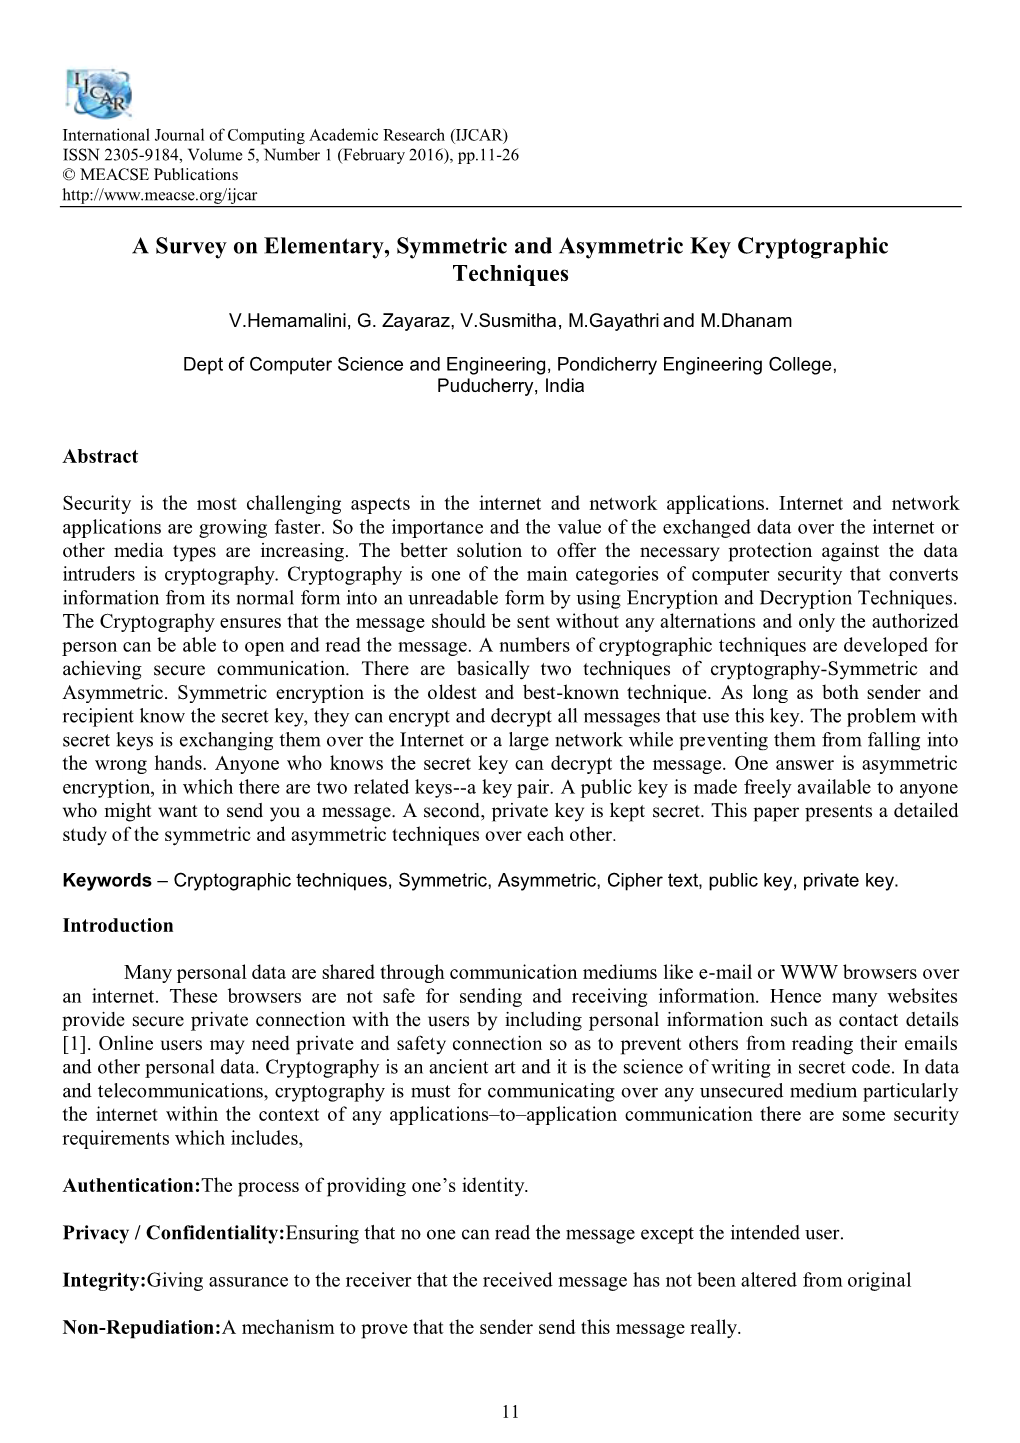 A Survey on Elementary, Symmetric and Asymmetric Key Cryptographic Techniques